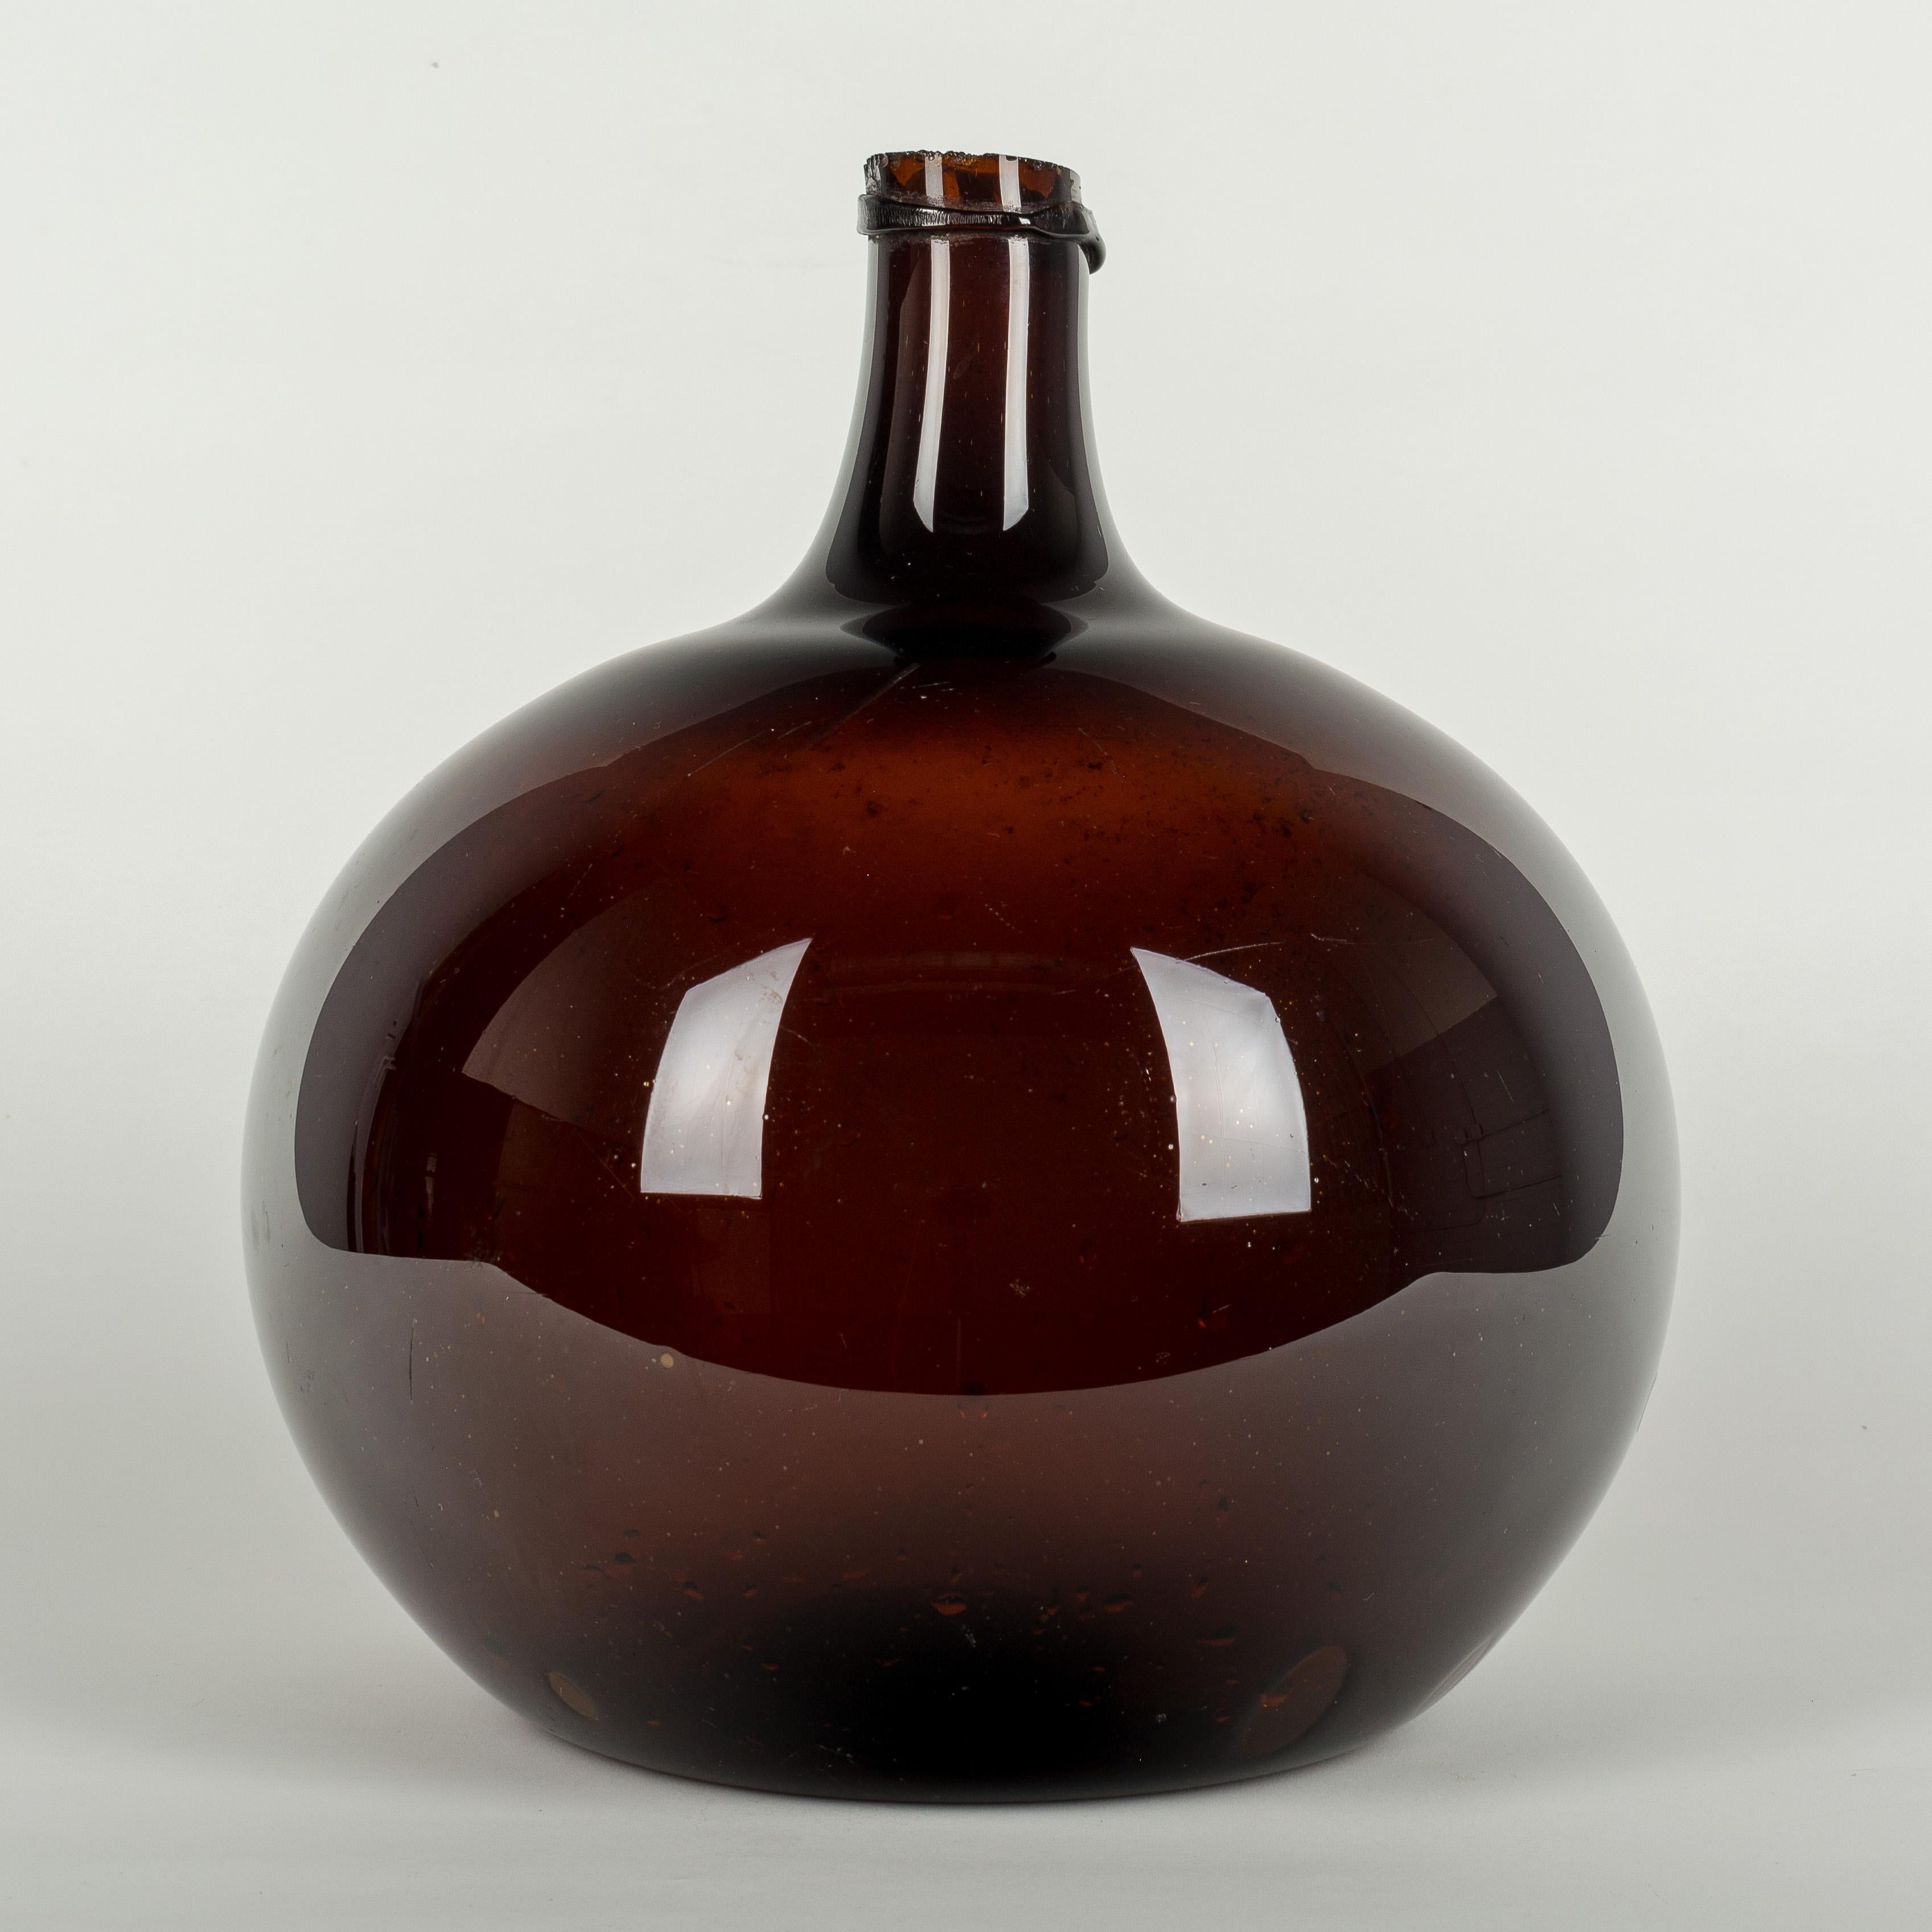 A large 19th century French globular form amber demijohn bottle with air bubbles typical of hand blown glass.